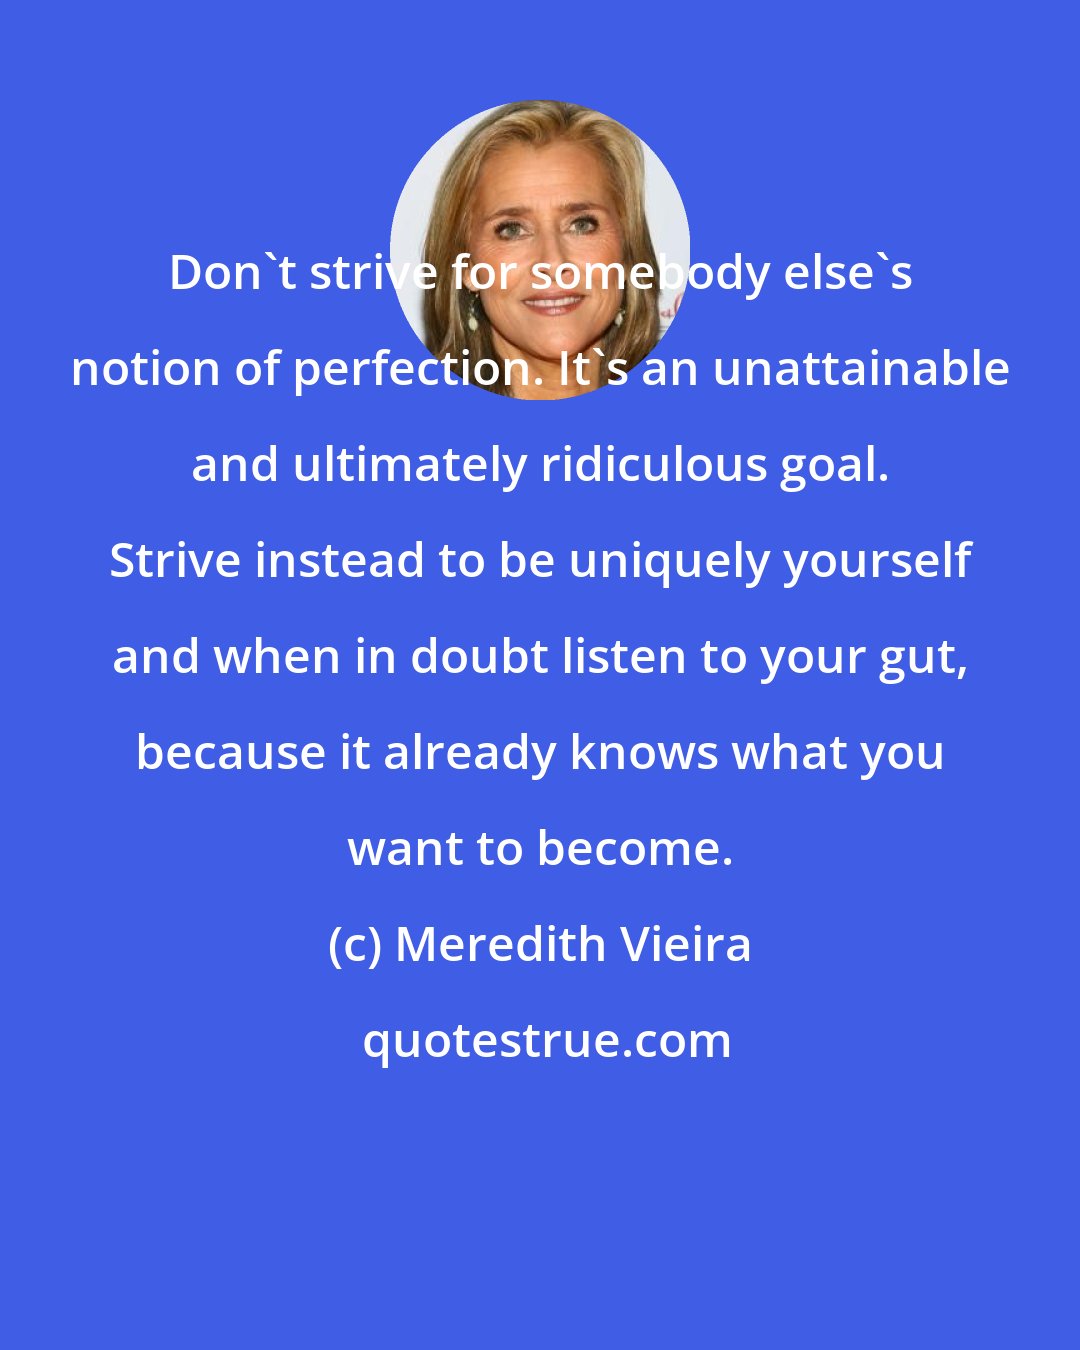 Meredith Vieira: Don't strive for somebody else's notion of perfection. It's an unattainable and ultimately ridiculous goal. Strive instead to be uniquely yourself and when in doubt listen to your gut, because it already knows what you want to become.